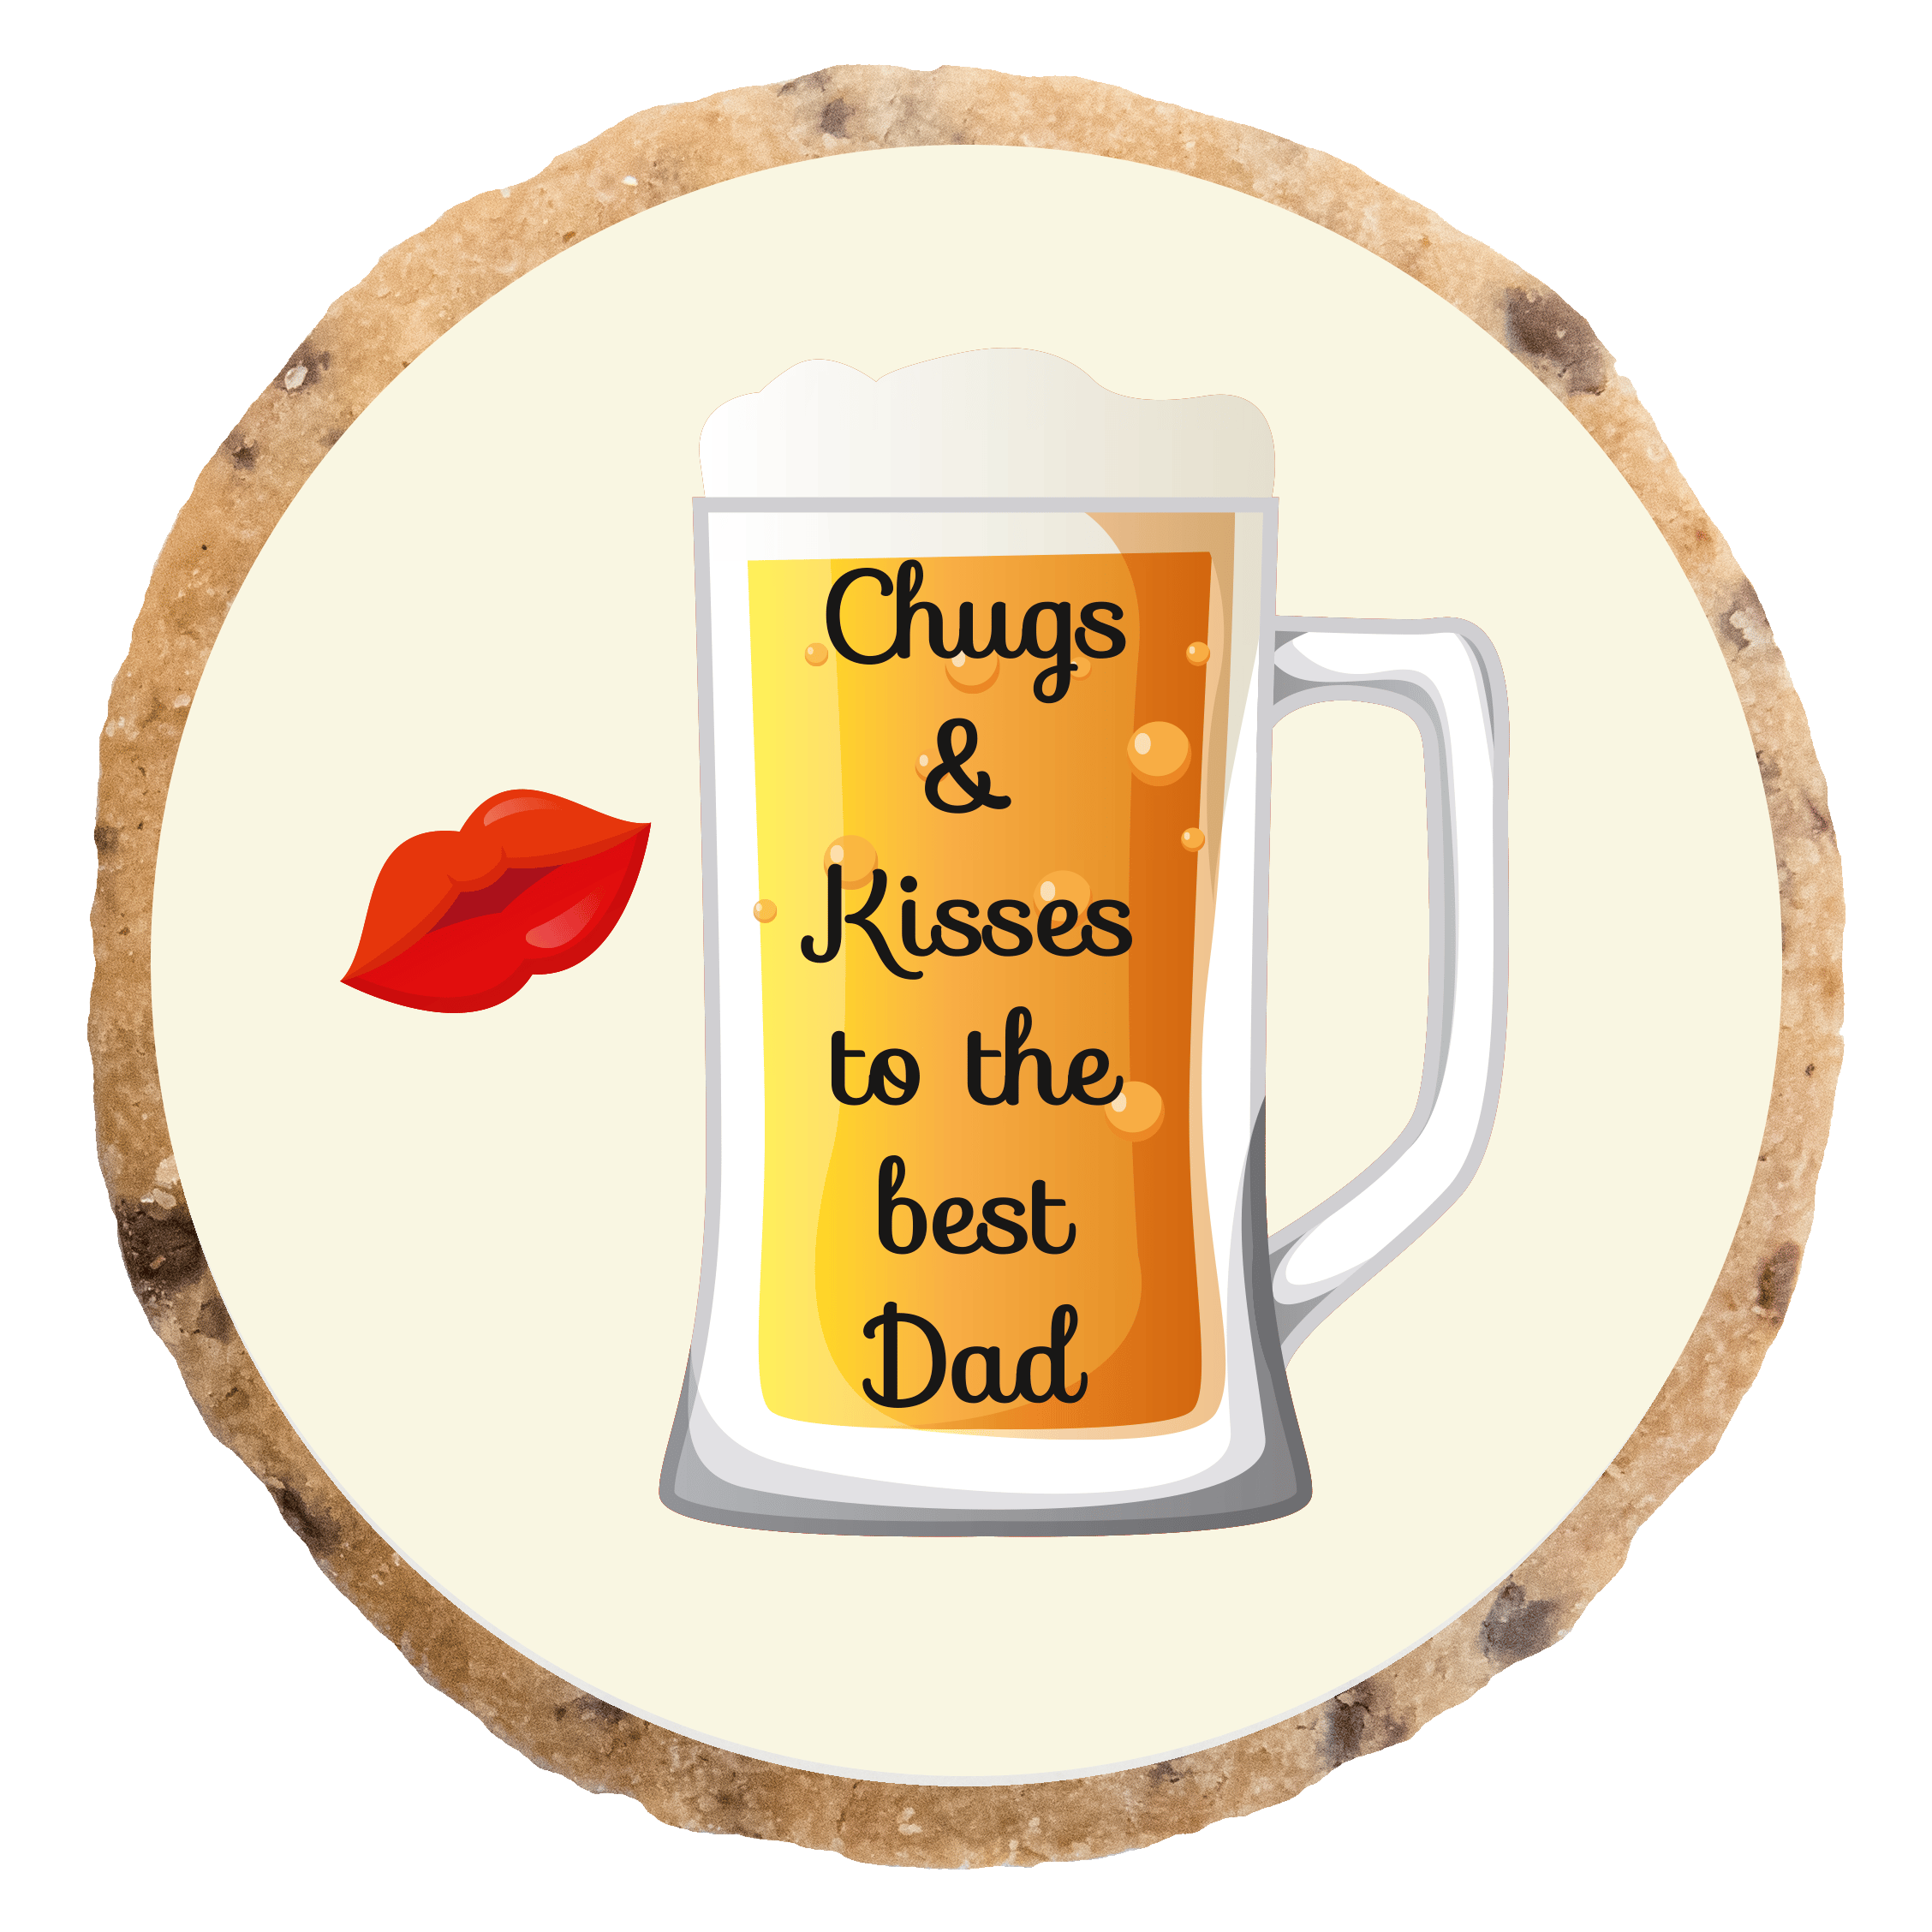 "Chugs and Kisses to the best Dad" MotivKEKS 